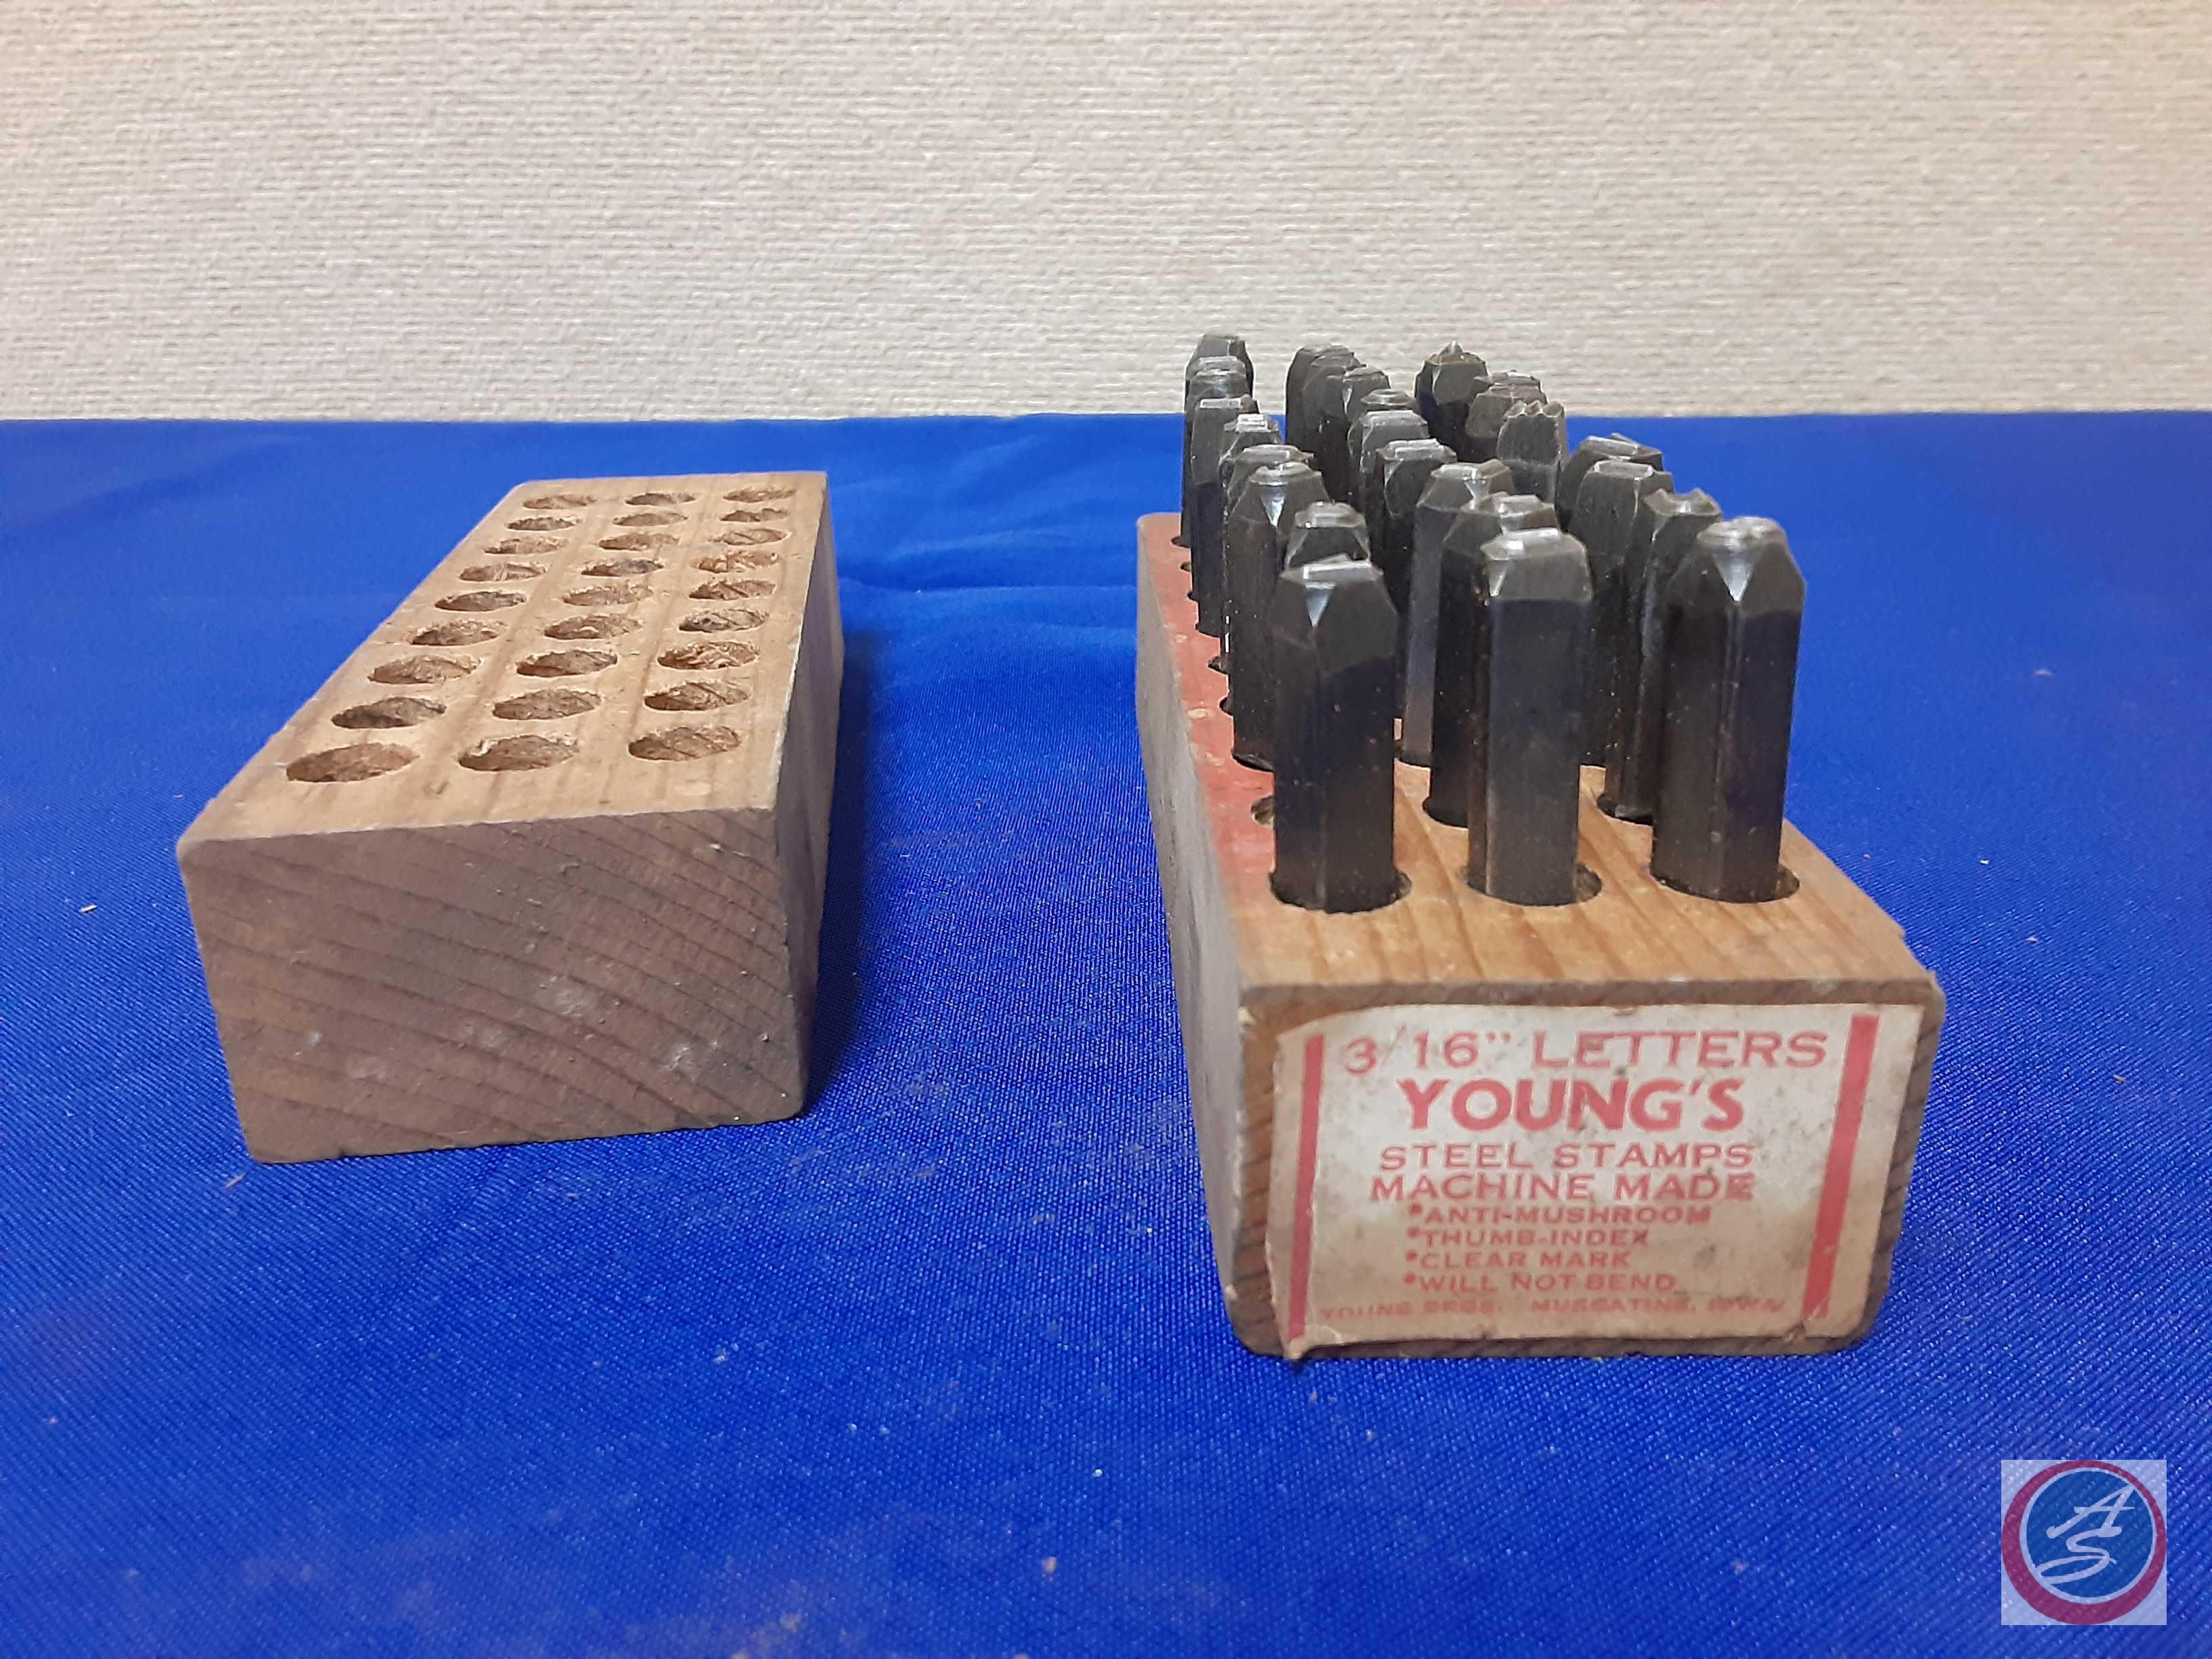 Skil Power Wrench 3/8in., Vintage Number Punch Set in Circular...Wood Cases, Young's...Letters Punch